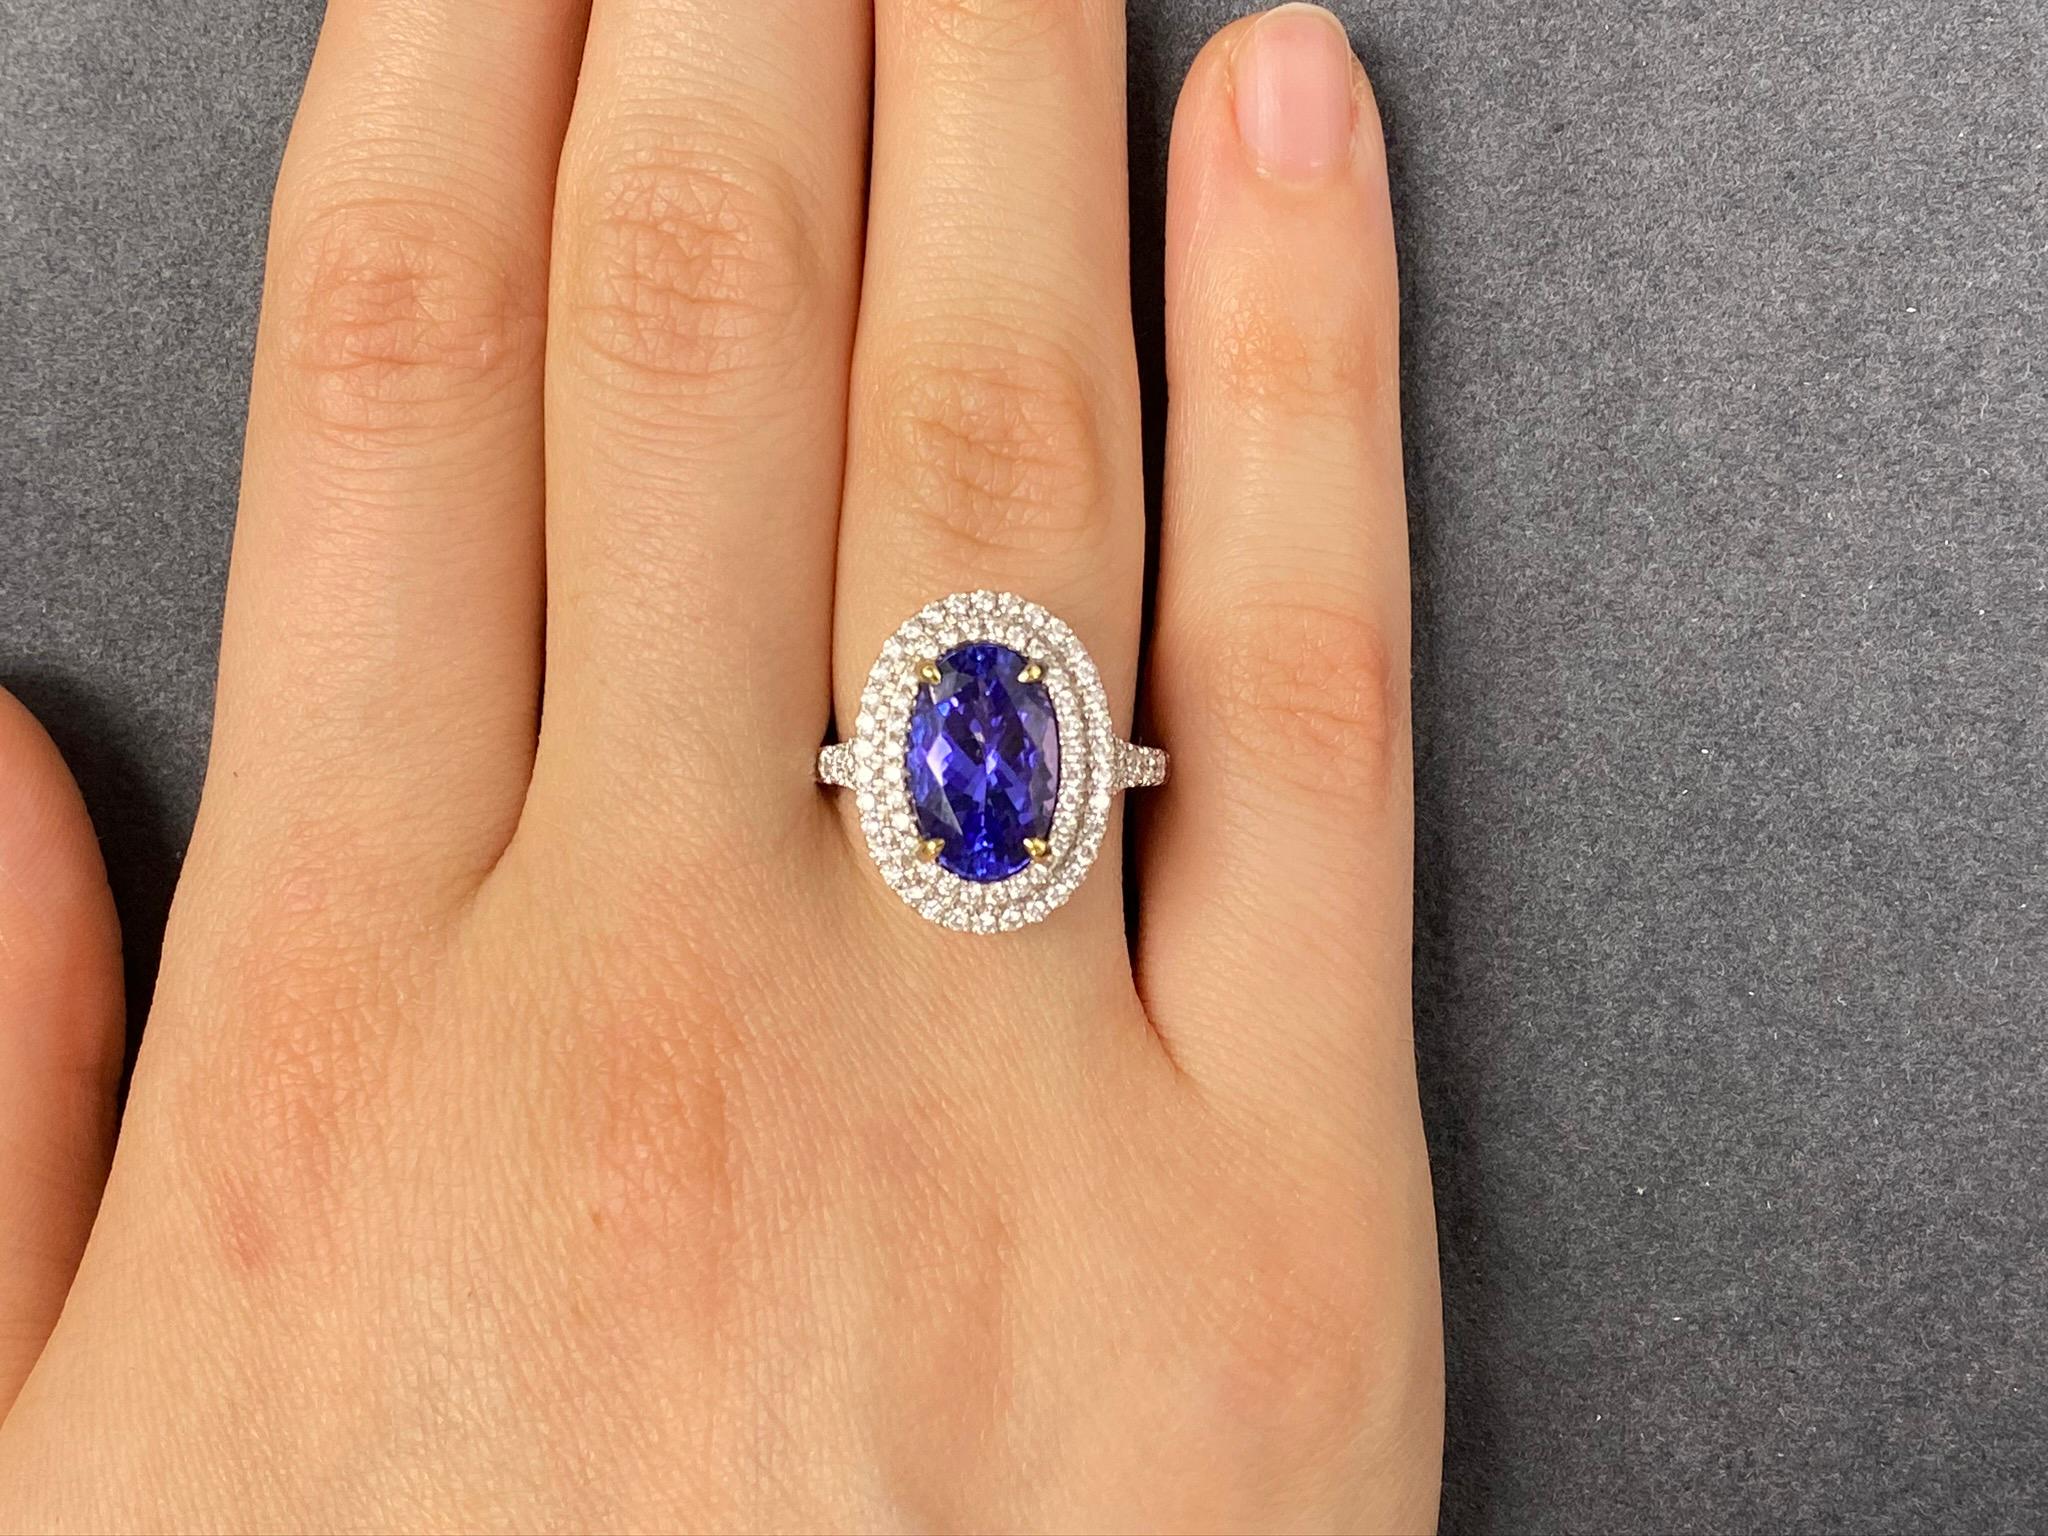 This beautiful cocktail ring features a stunning 3.70 Carat Oval Tanzanite with a Double Diamond Halo, that sits on a split Diamond Shank. This Ring is set in 18k White Gold, with 18k Yellow Gold prongs on the center stone. Total Diamond Weight =